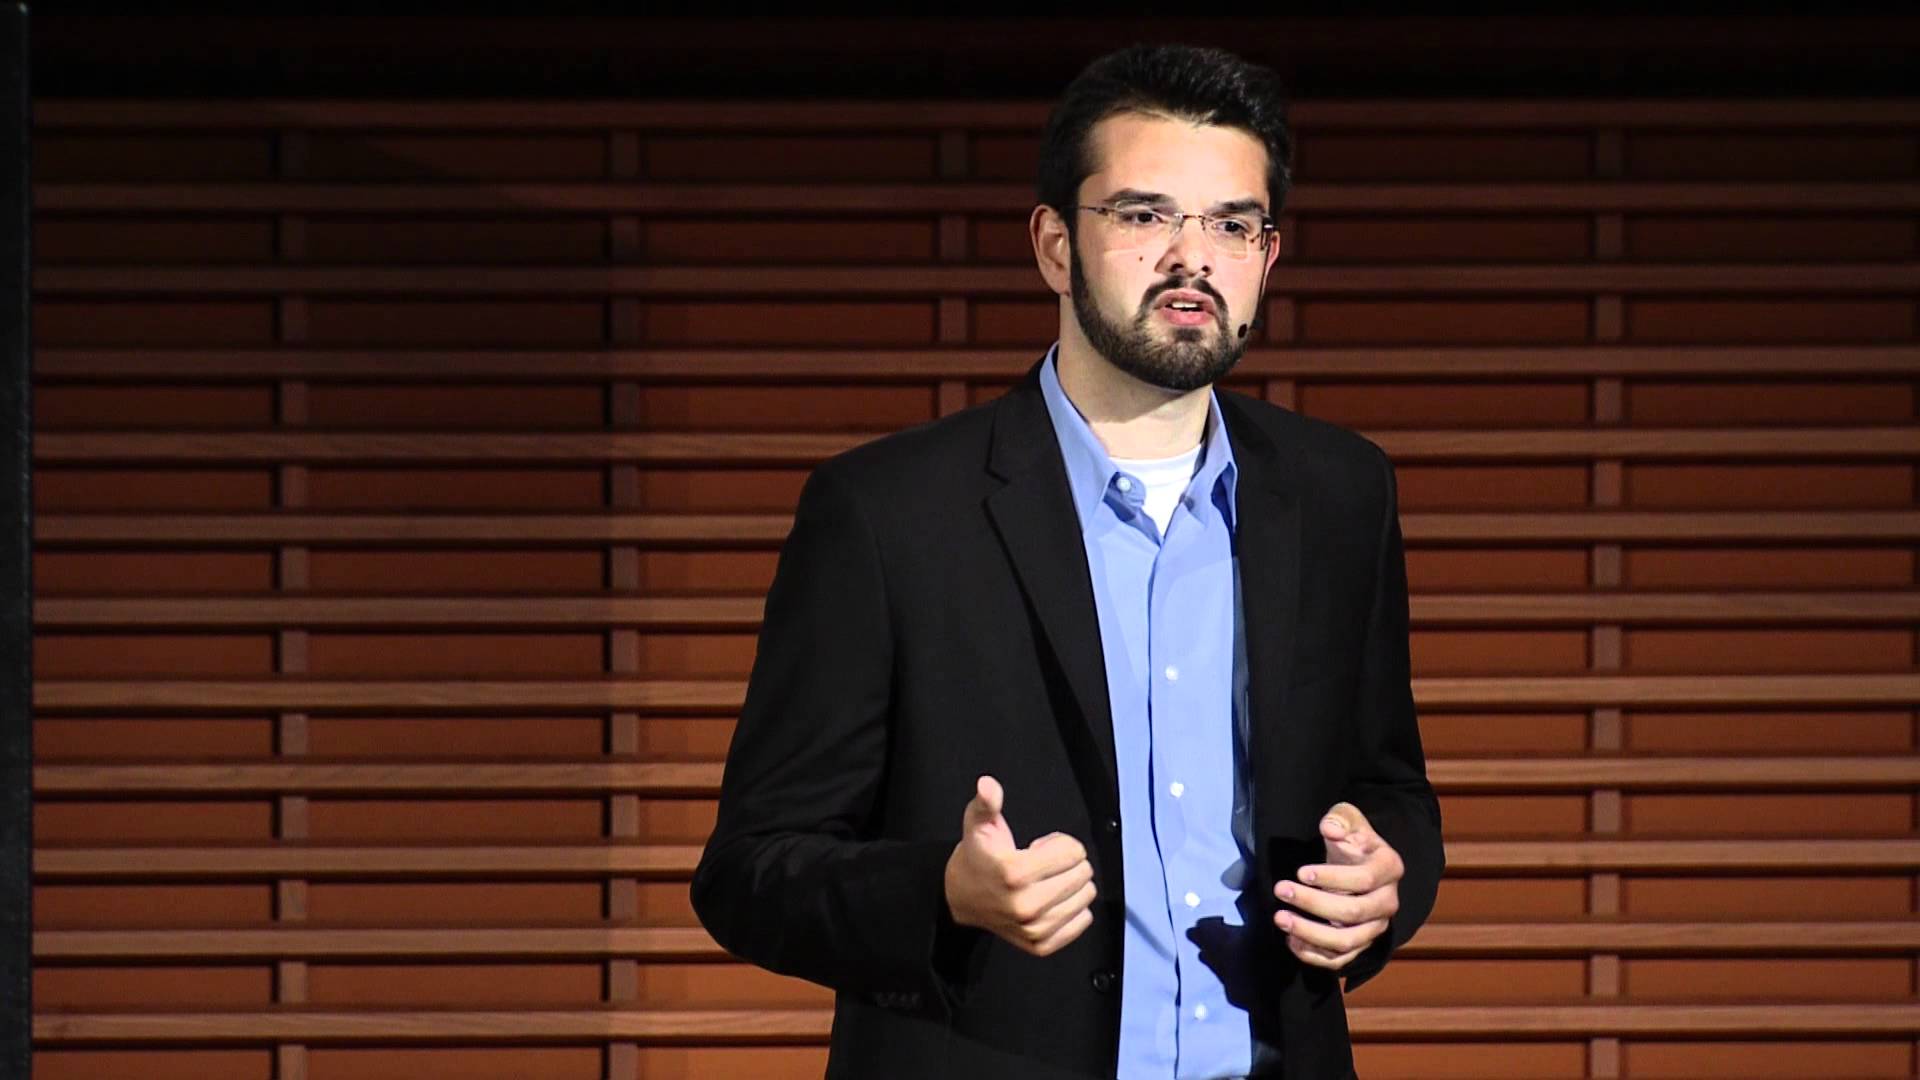 Health care is more than just policy: Rayden Llano at TEDxStanford